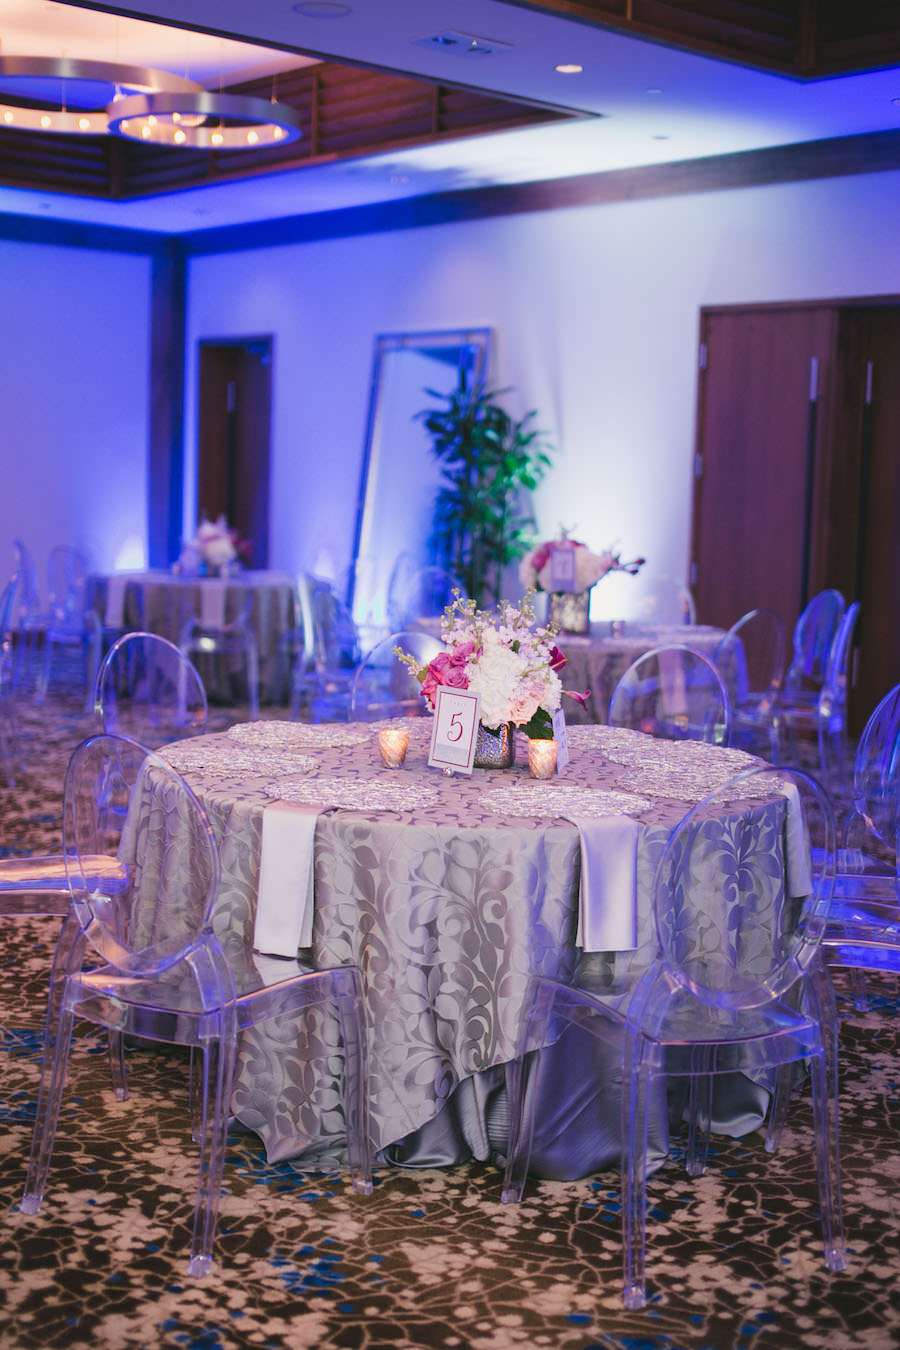 Silver Reception Decor with Pink and White Wedding Centerpieces, Purple Uplighting and Ghost Chairs | Linens by Over the Top Rental Linens | Chargers by Signature Event Rentals | Lighting by Gabro Event Services | Roohi Photography